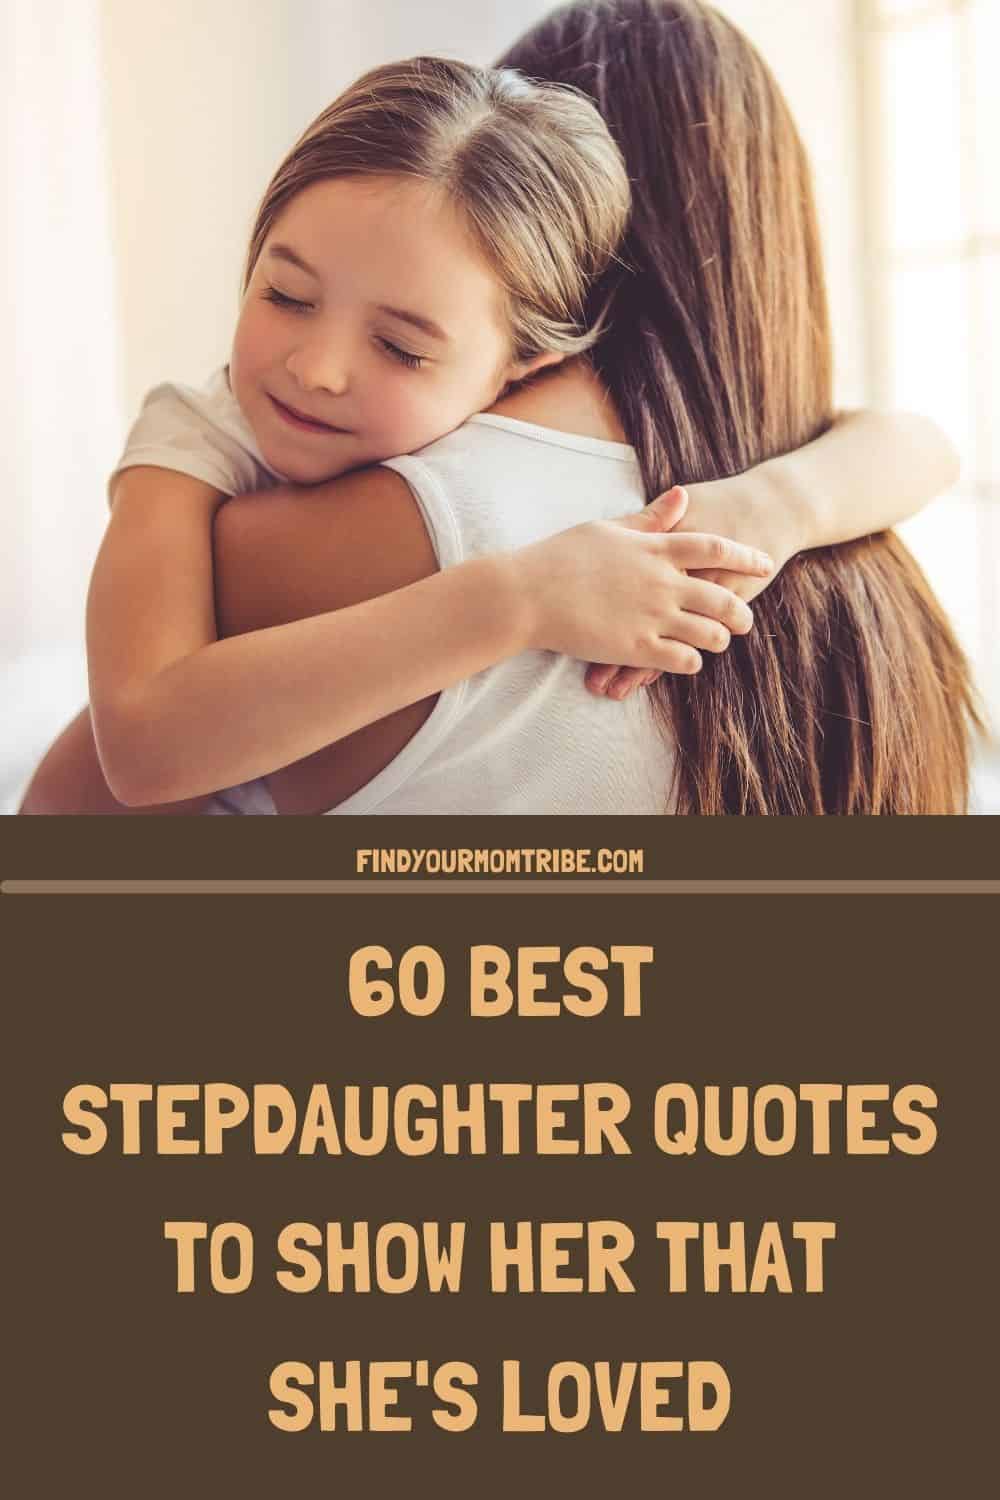 Pinterest stepdaughter quotes 